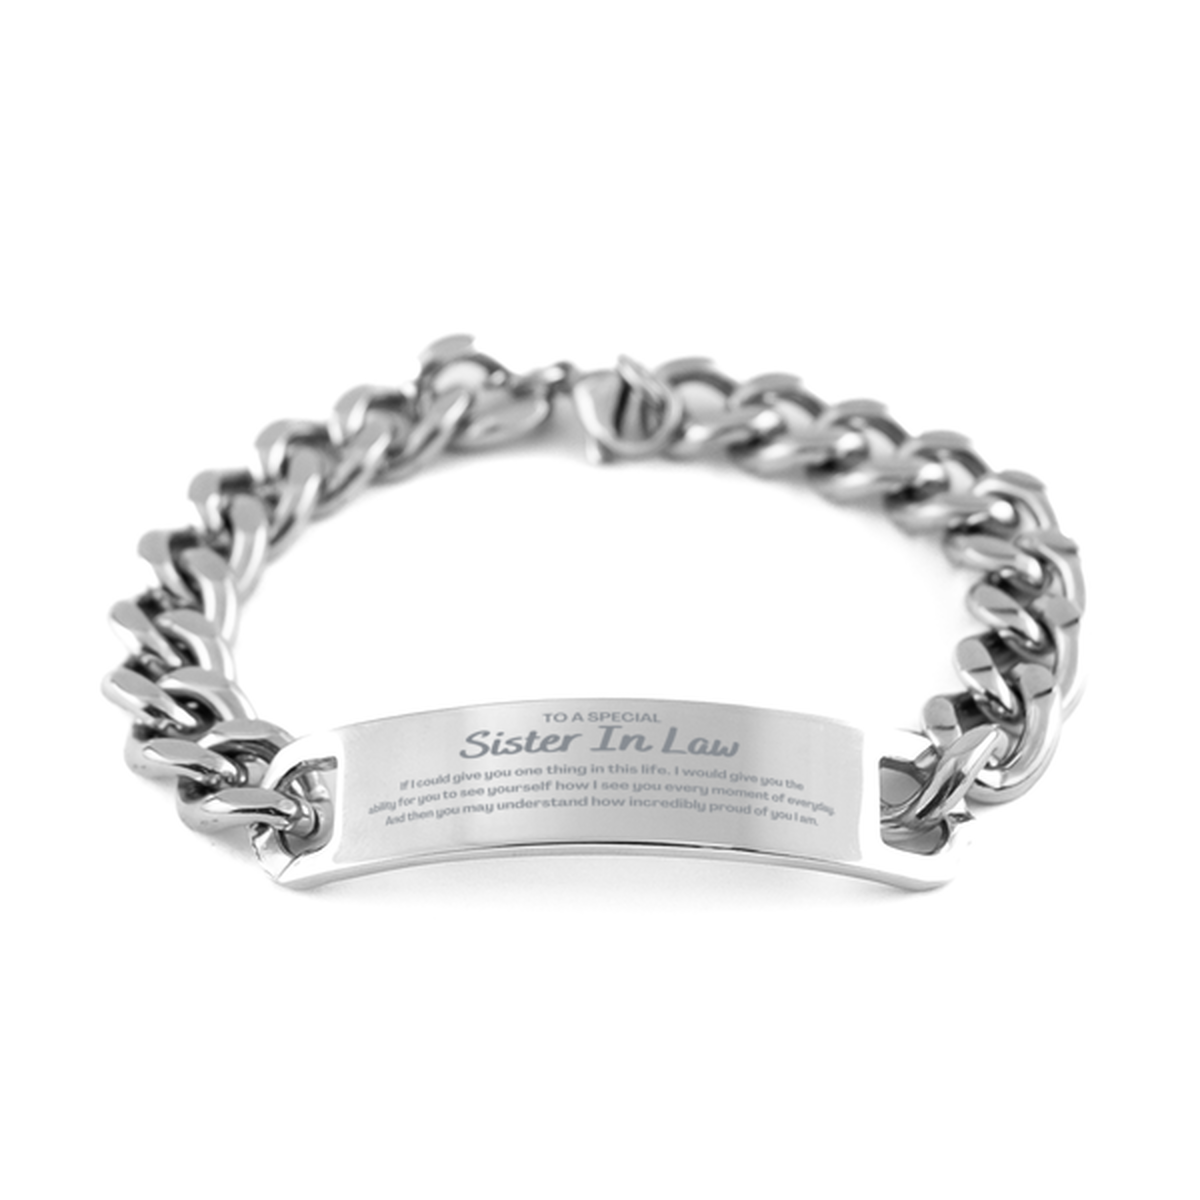 To My Sister In Law Cuban Chain Stainless Steel Bracelet, Gifts For Sister In Law Engraved, Inspirational Gifts for Christmas Birthday, Epic Gifts for Sister In Law To A Special Sister In Law how incredibly proud of you I am